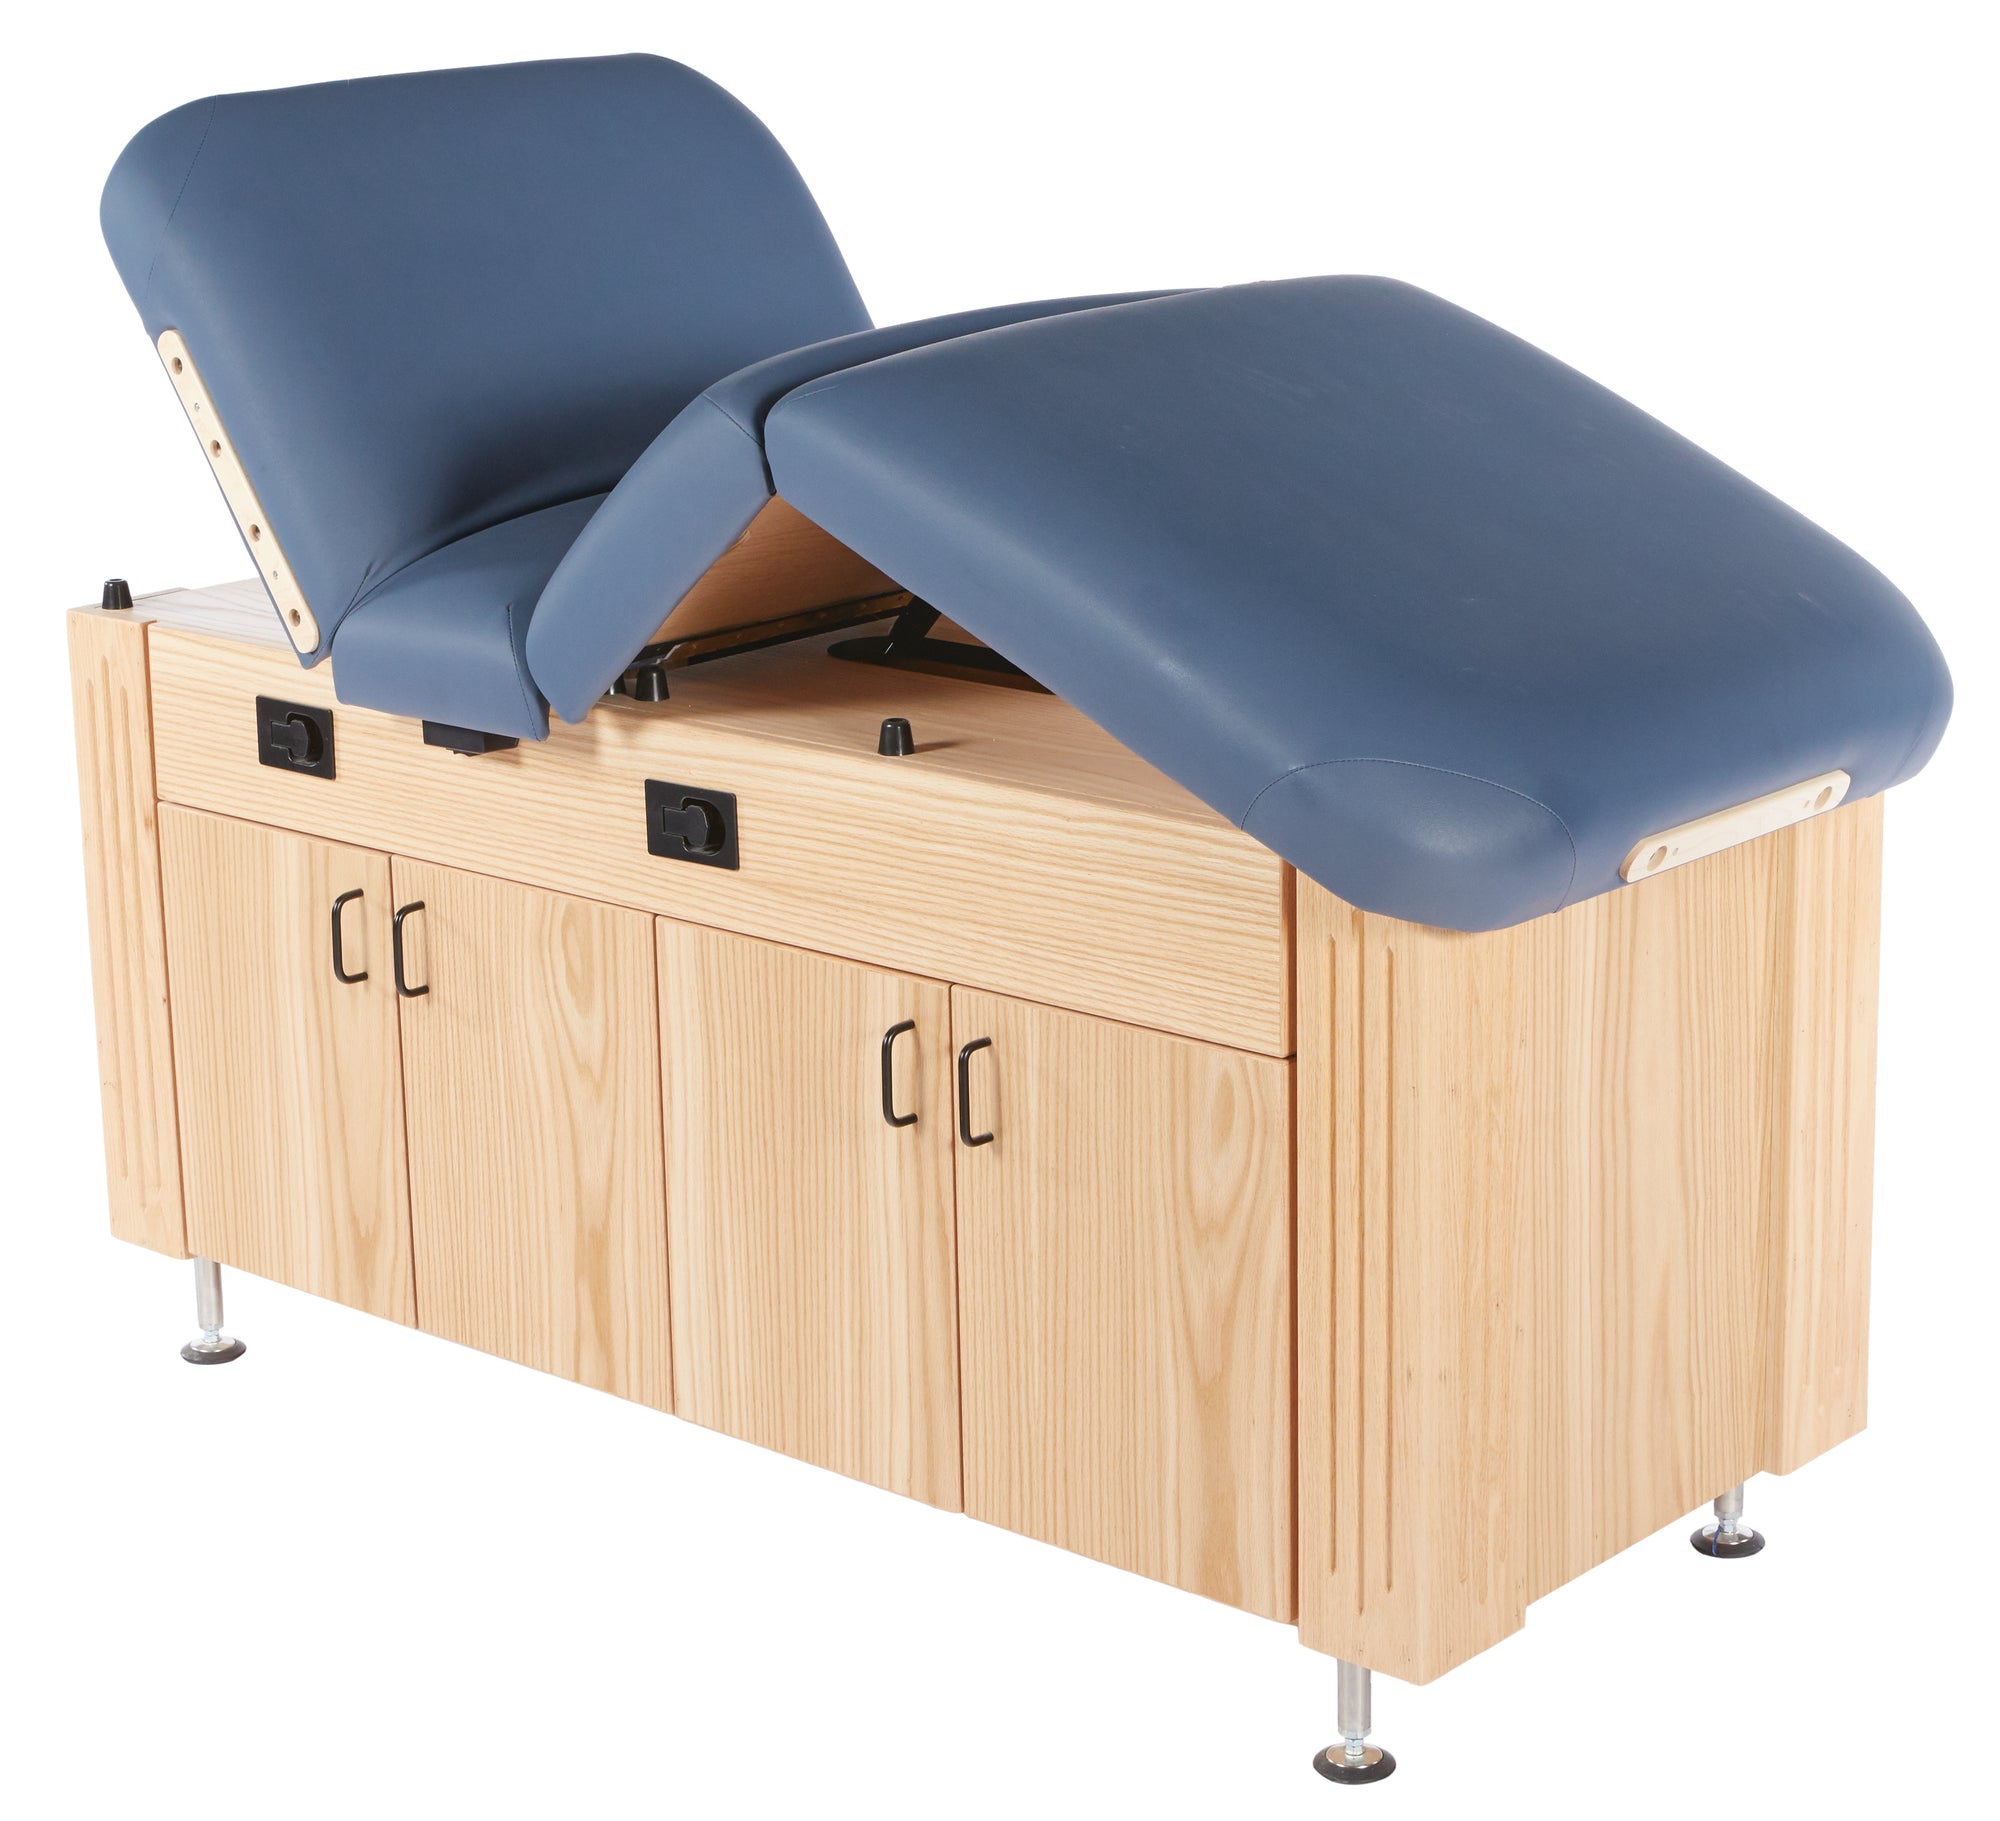 Signature Series by Custom Craftworks - M100 Deluxe Electric Lift Spa/Massage Table - Superb Massage Tables